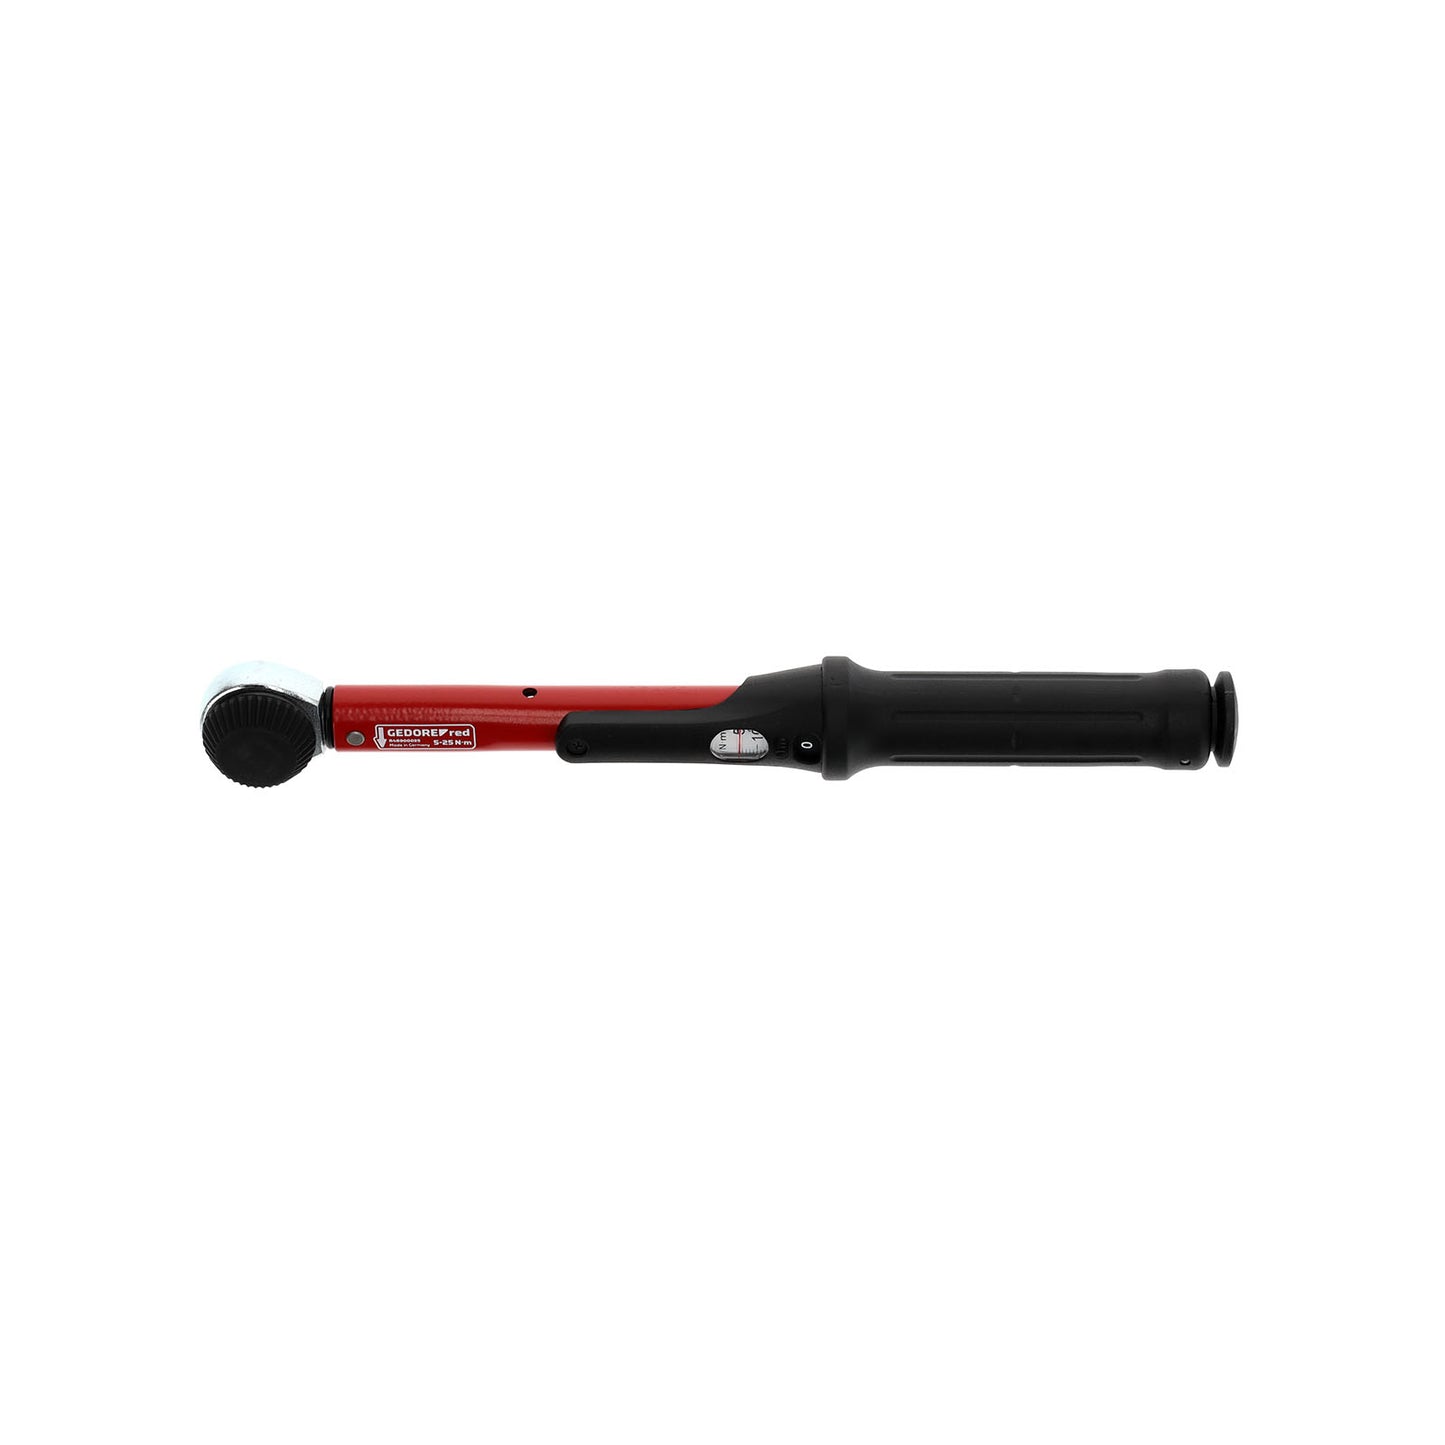 GEDORE red R48900025 - 1/4" torque wrench 5-25 Nm (3301214)